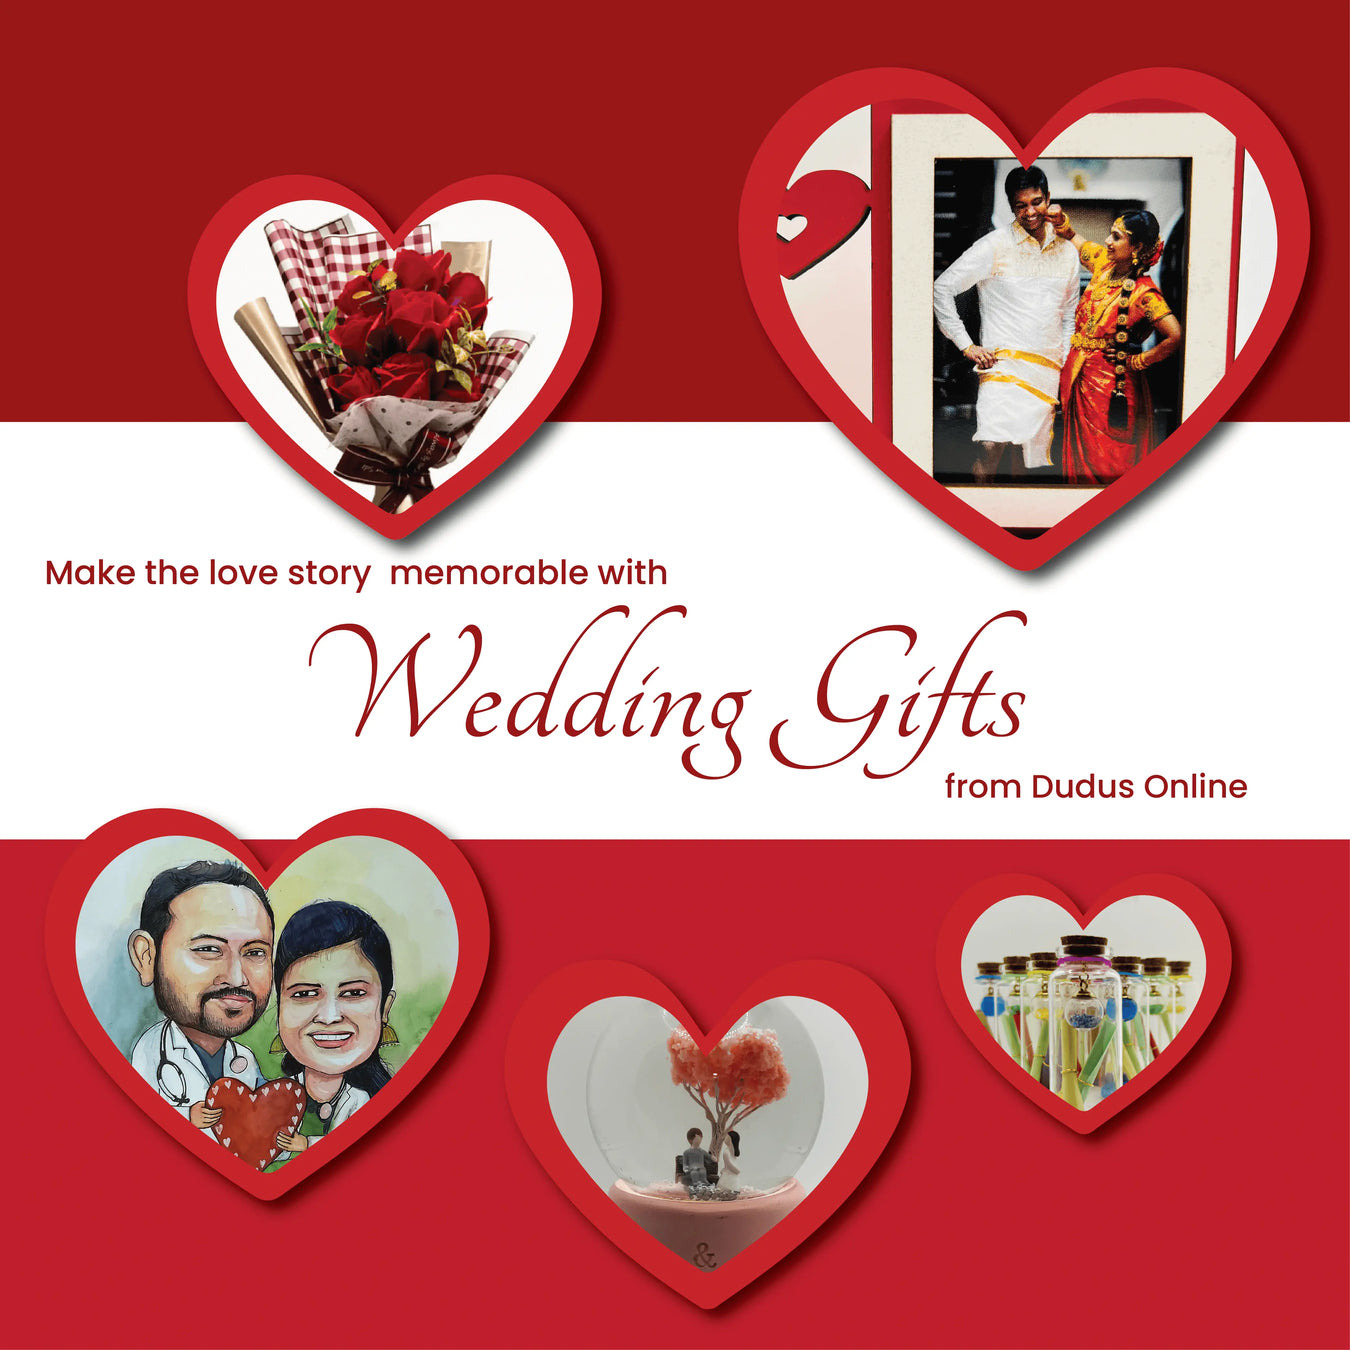 Shop wedding gifts from Dudus Online